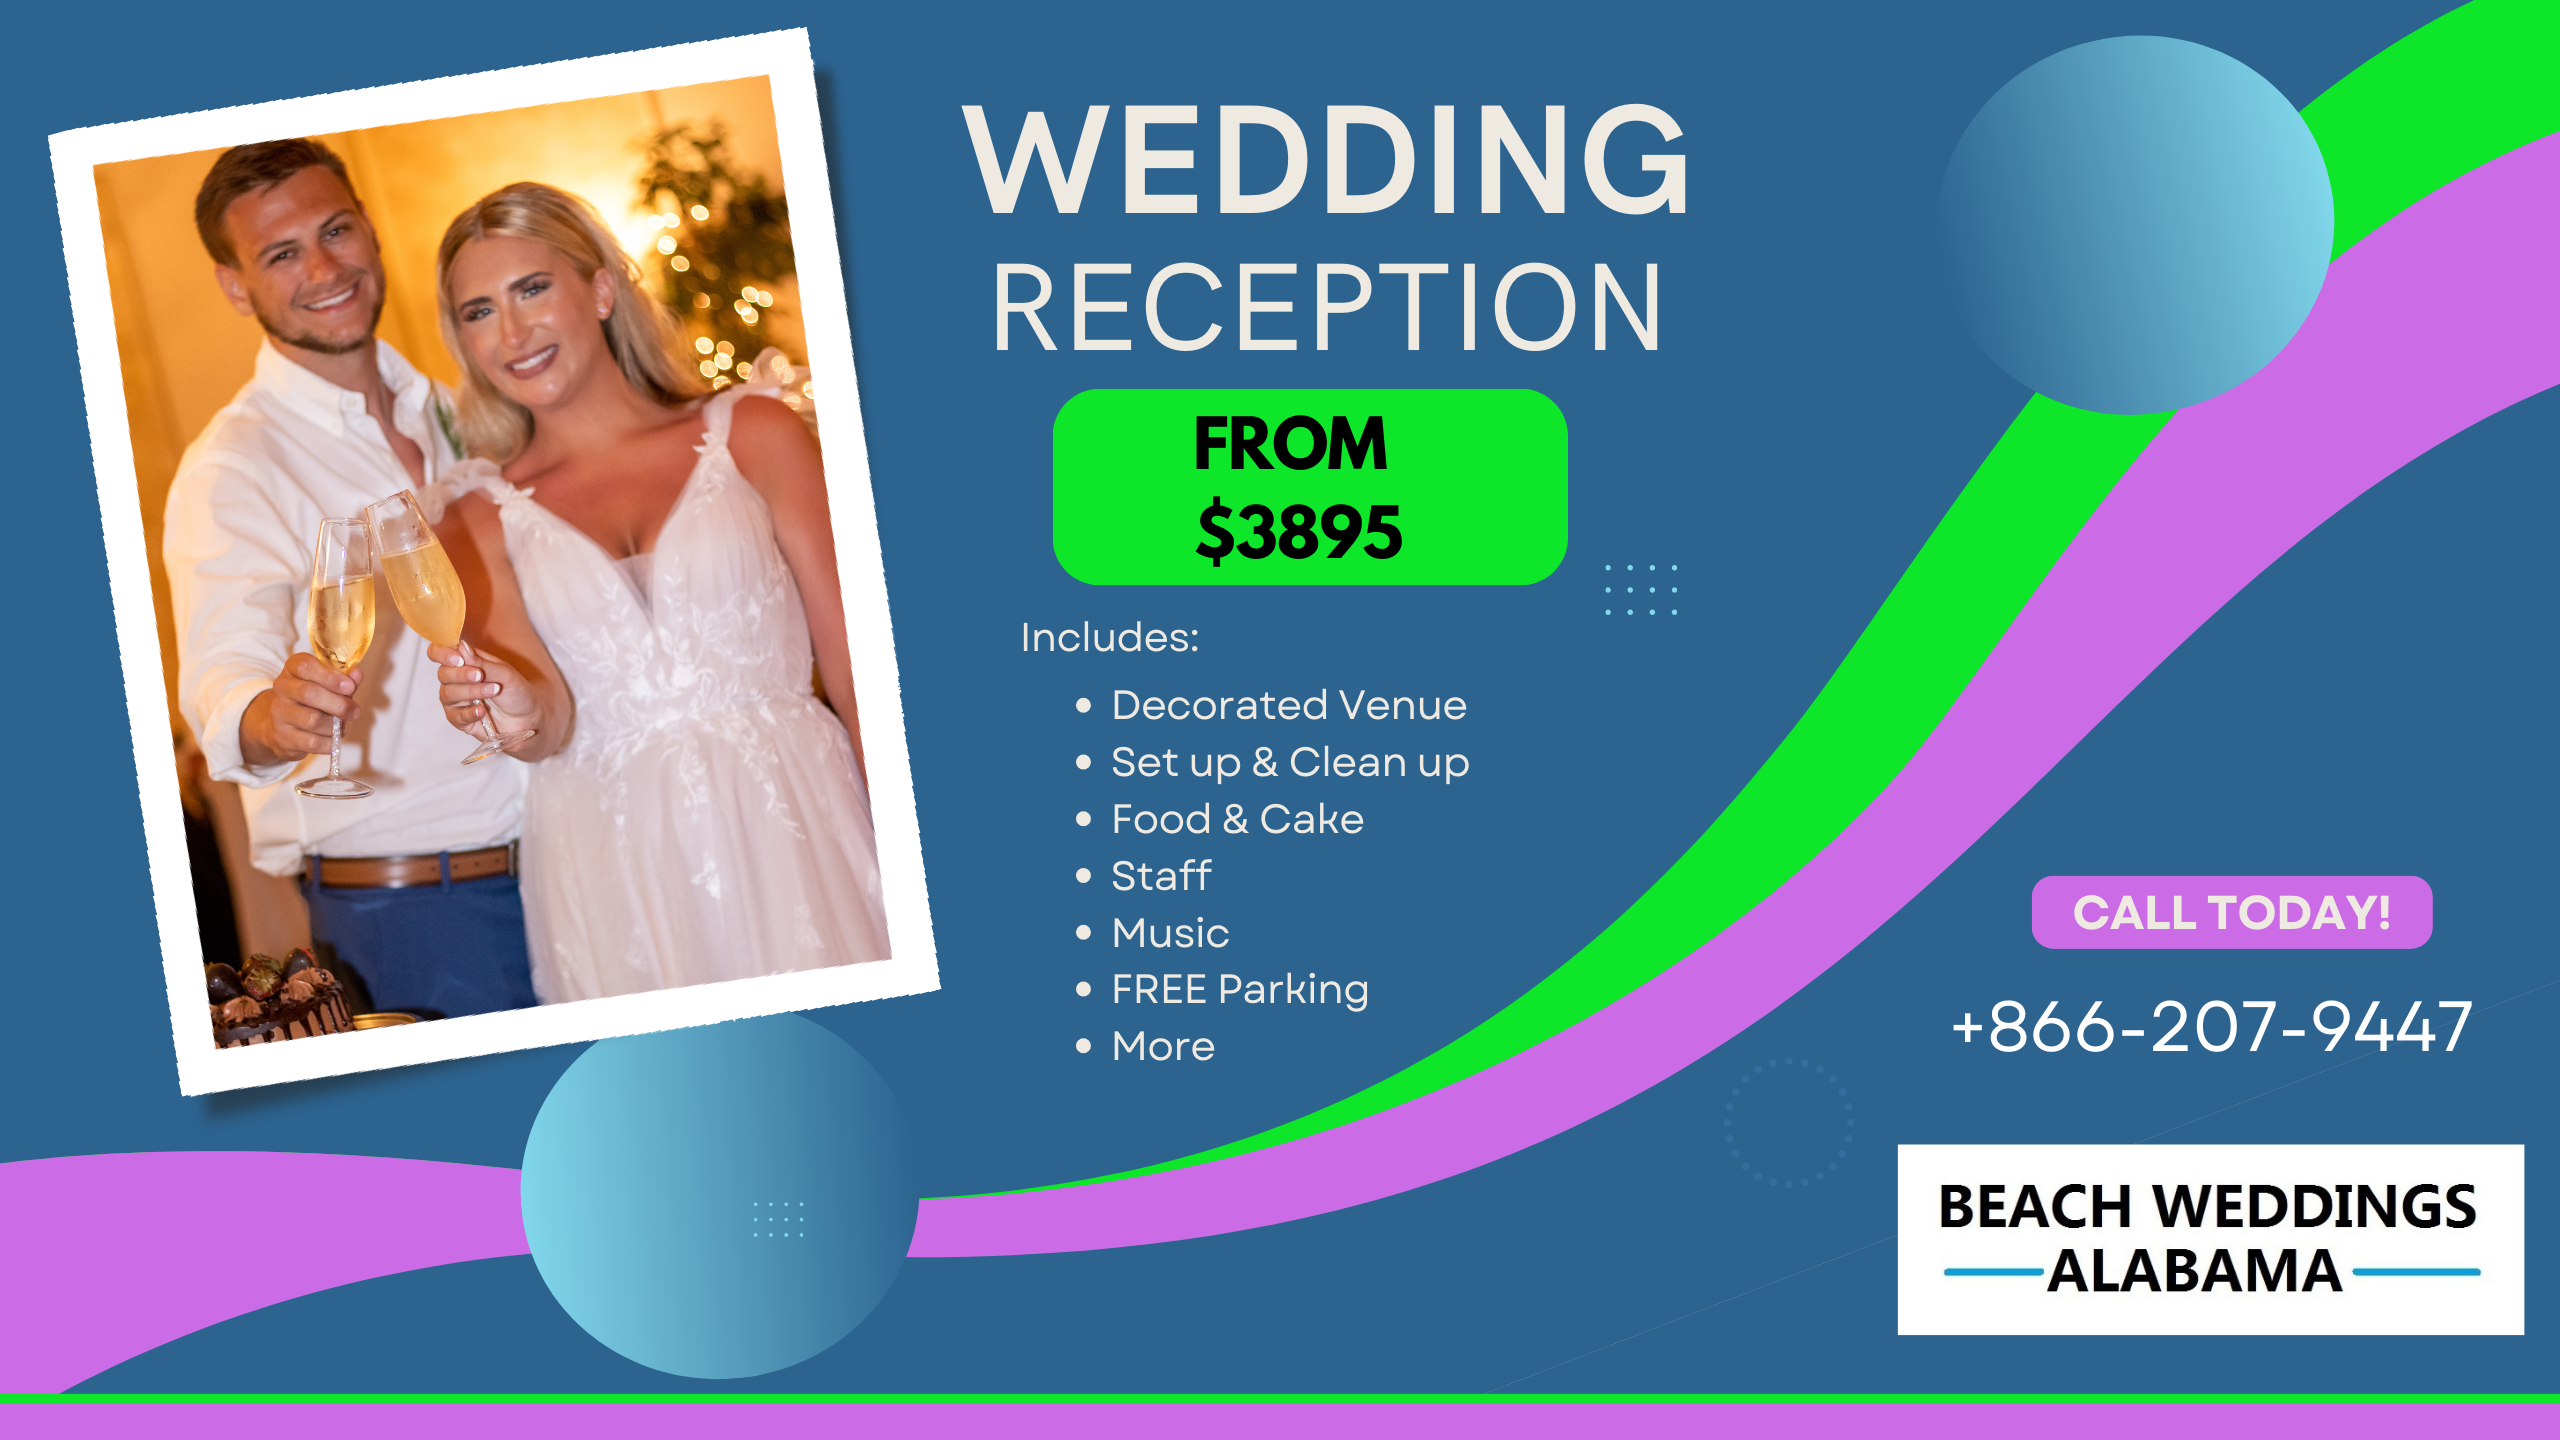 Wedding Reception from 95. PROMO Many freebies When you Book your Reception this month! Call 866-207-9447